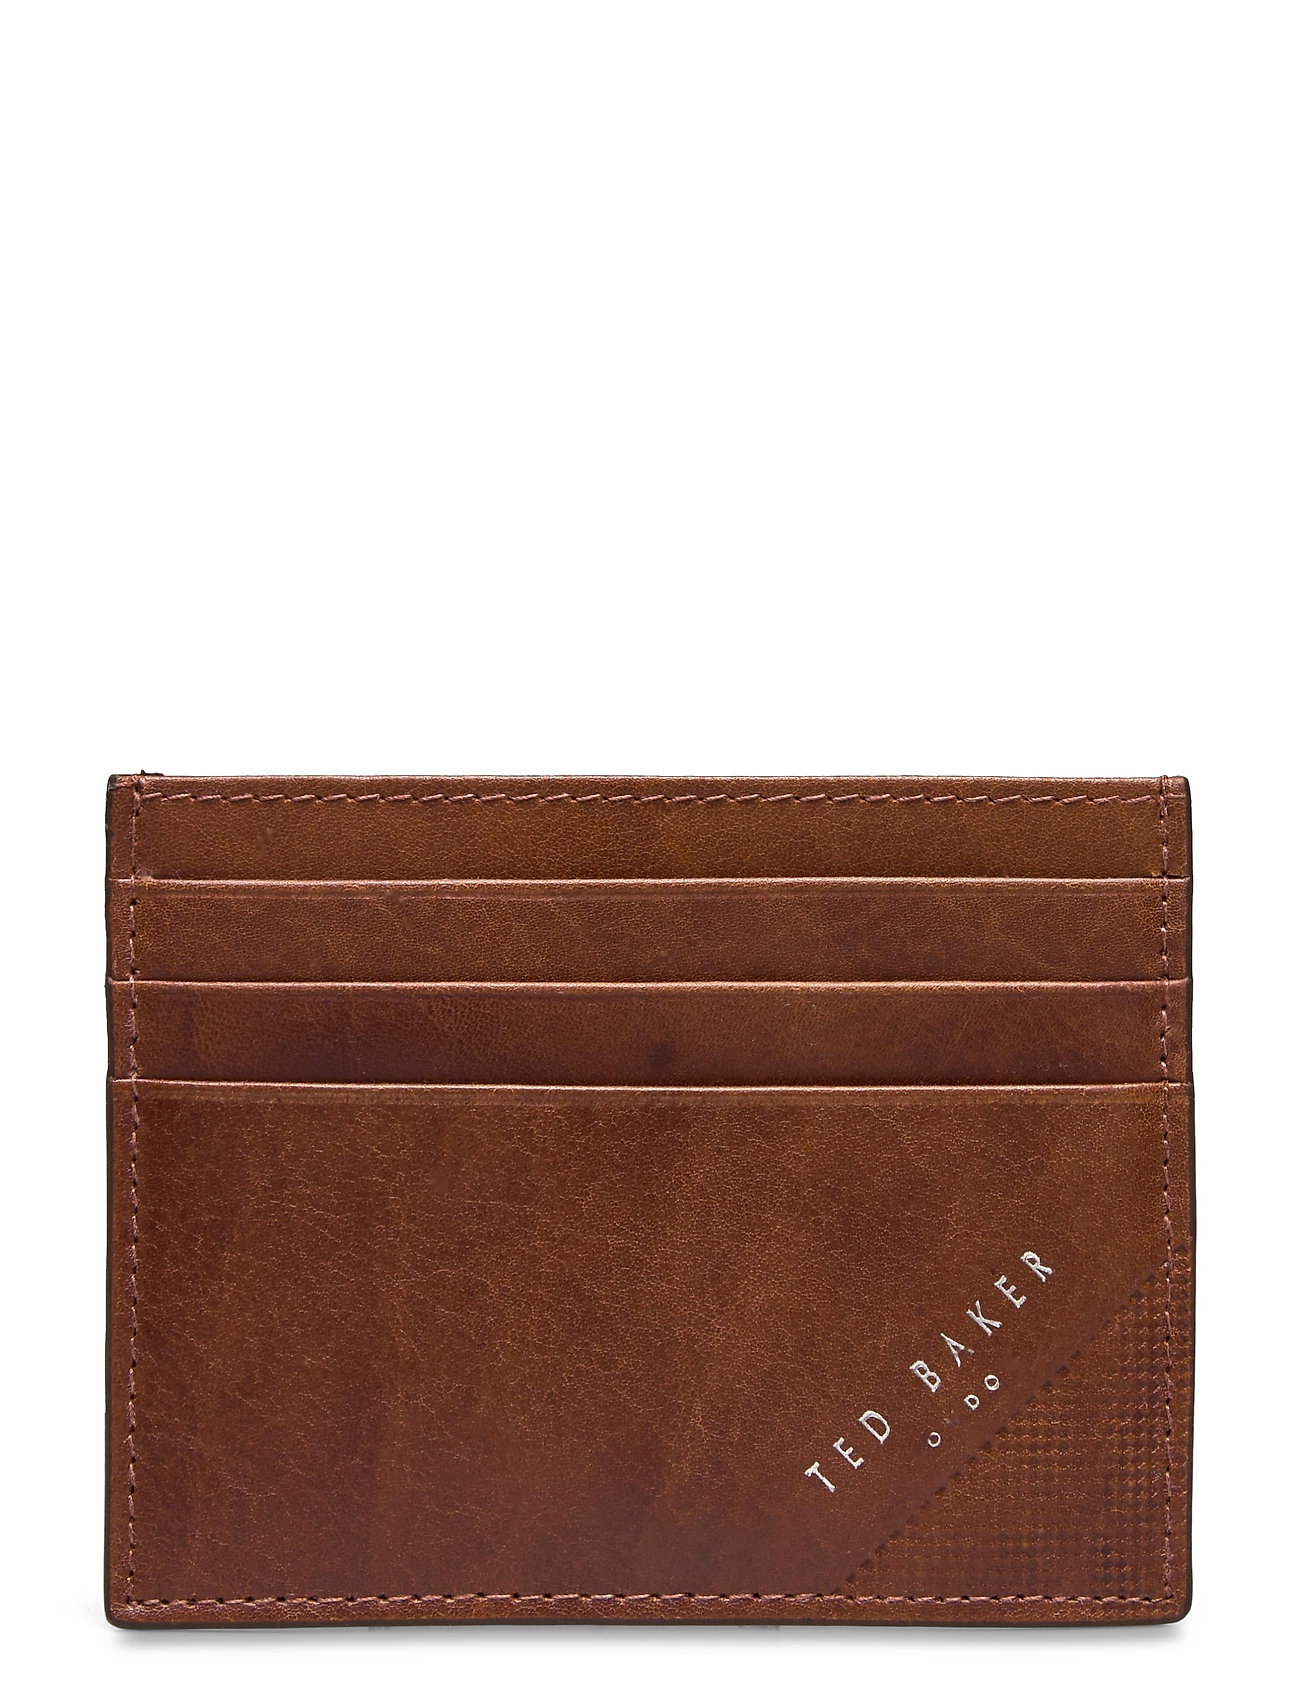 Rifle Accessories Wallets Cardholder Ruskea Ted Baker